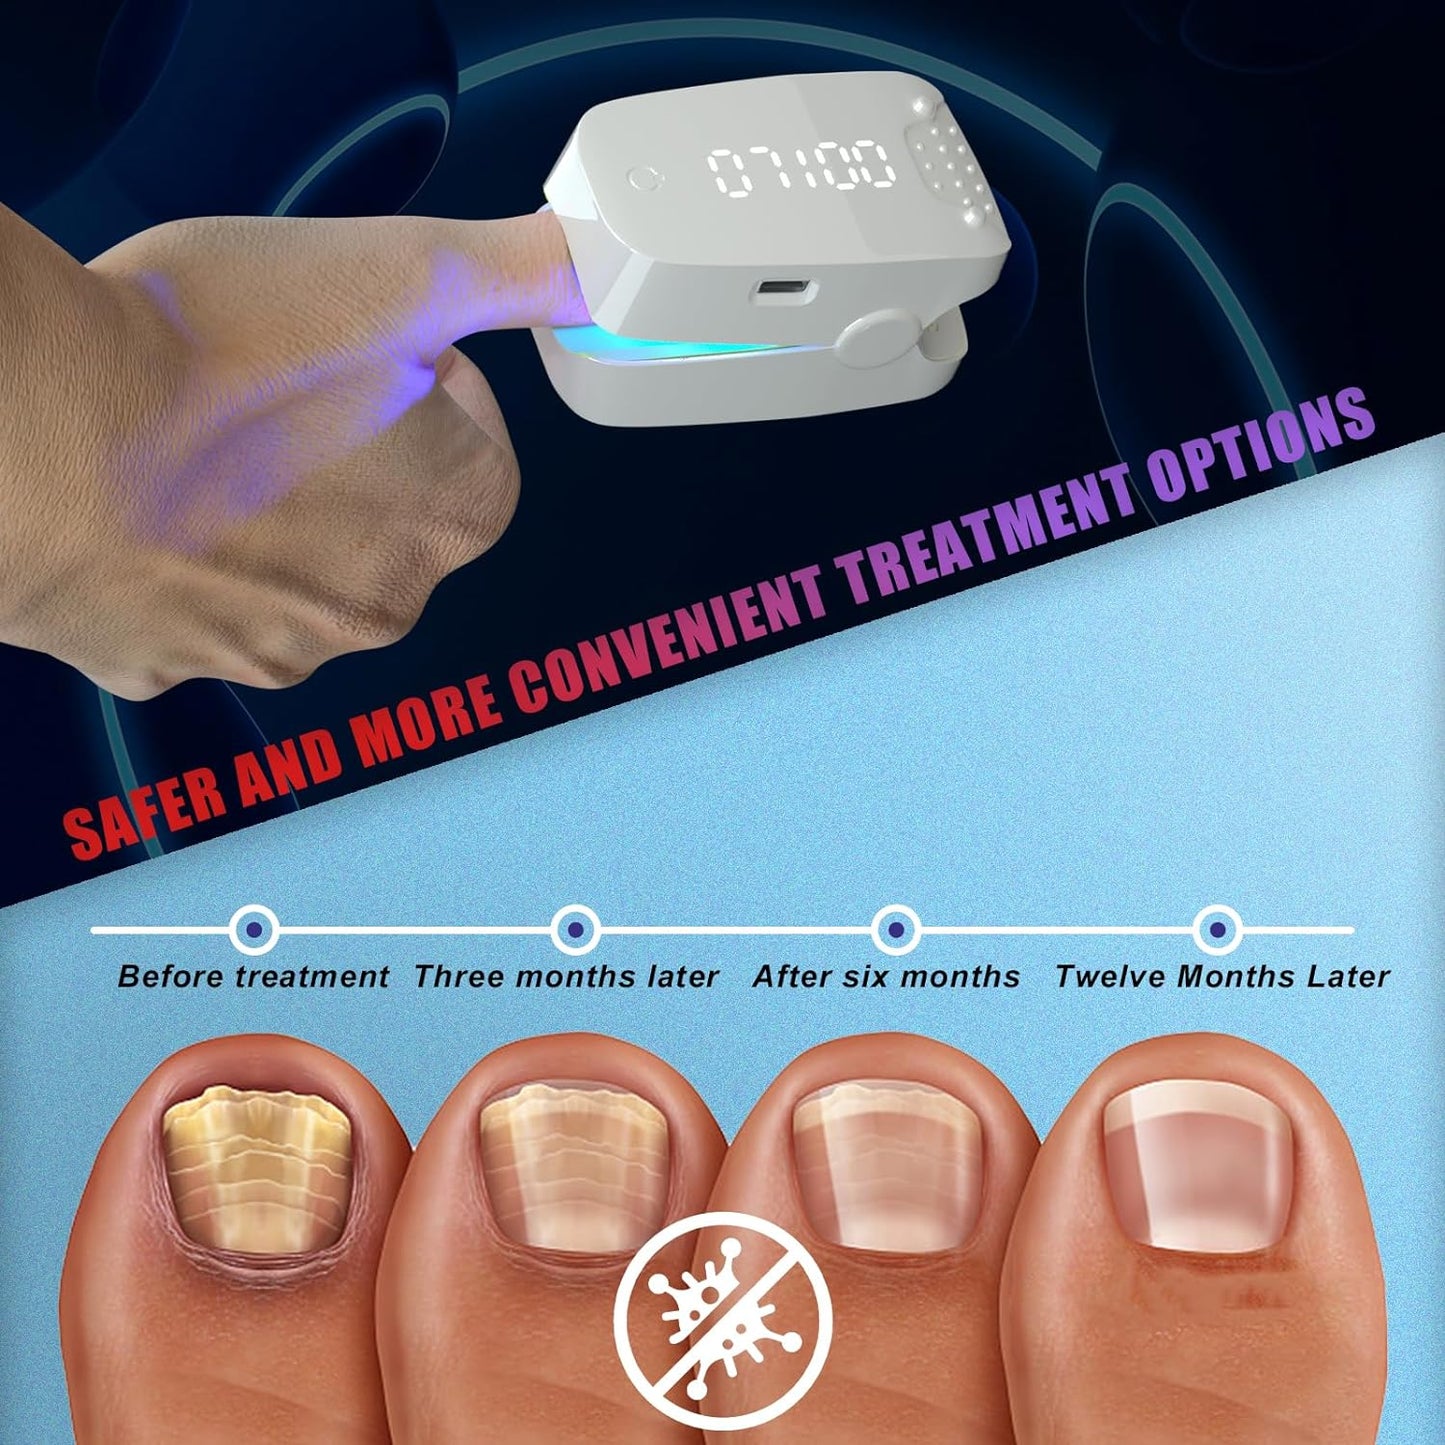 hanvate Nail Fungus Cleaning Laser Device,Efficient Laser Treatment For Nail Fungus，LED Screen, Automatic Timer